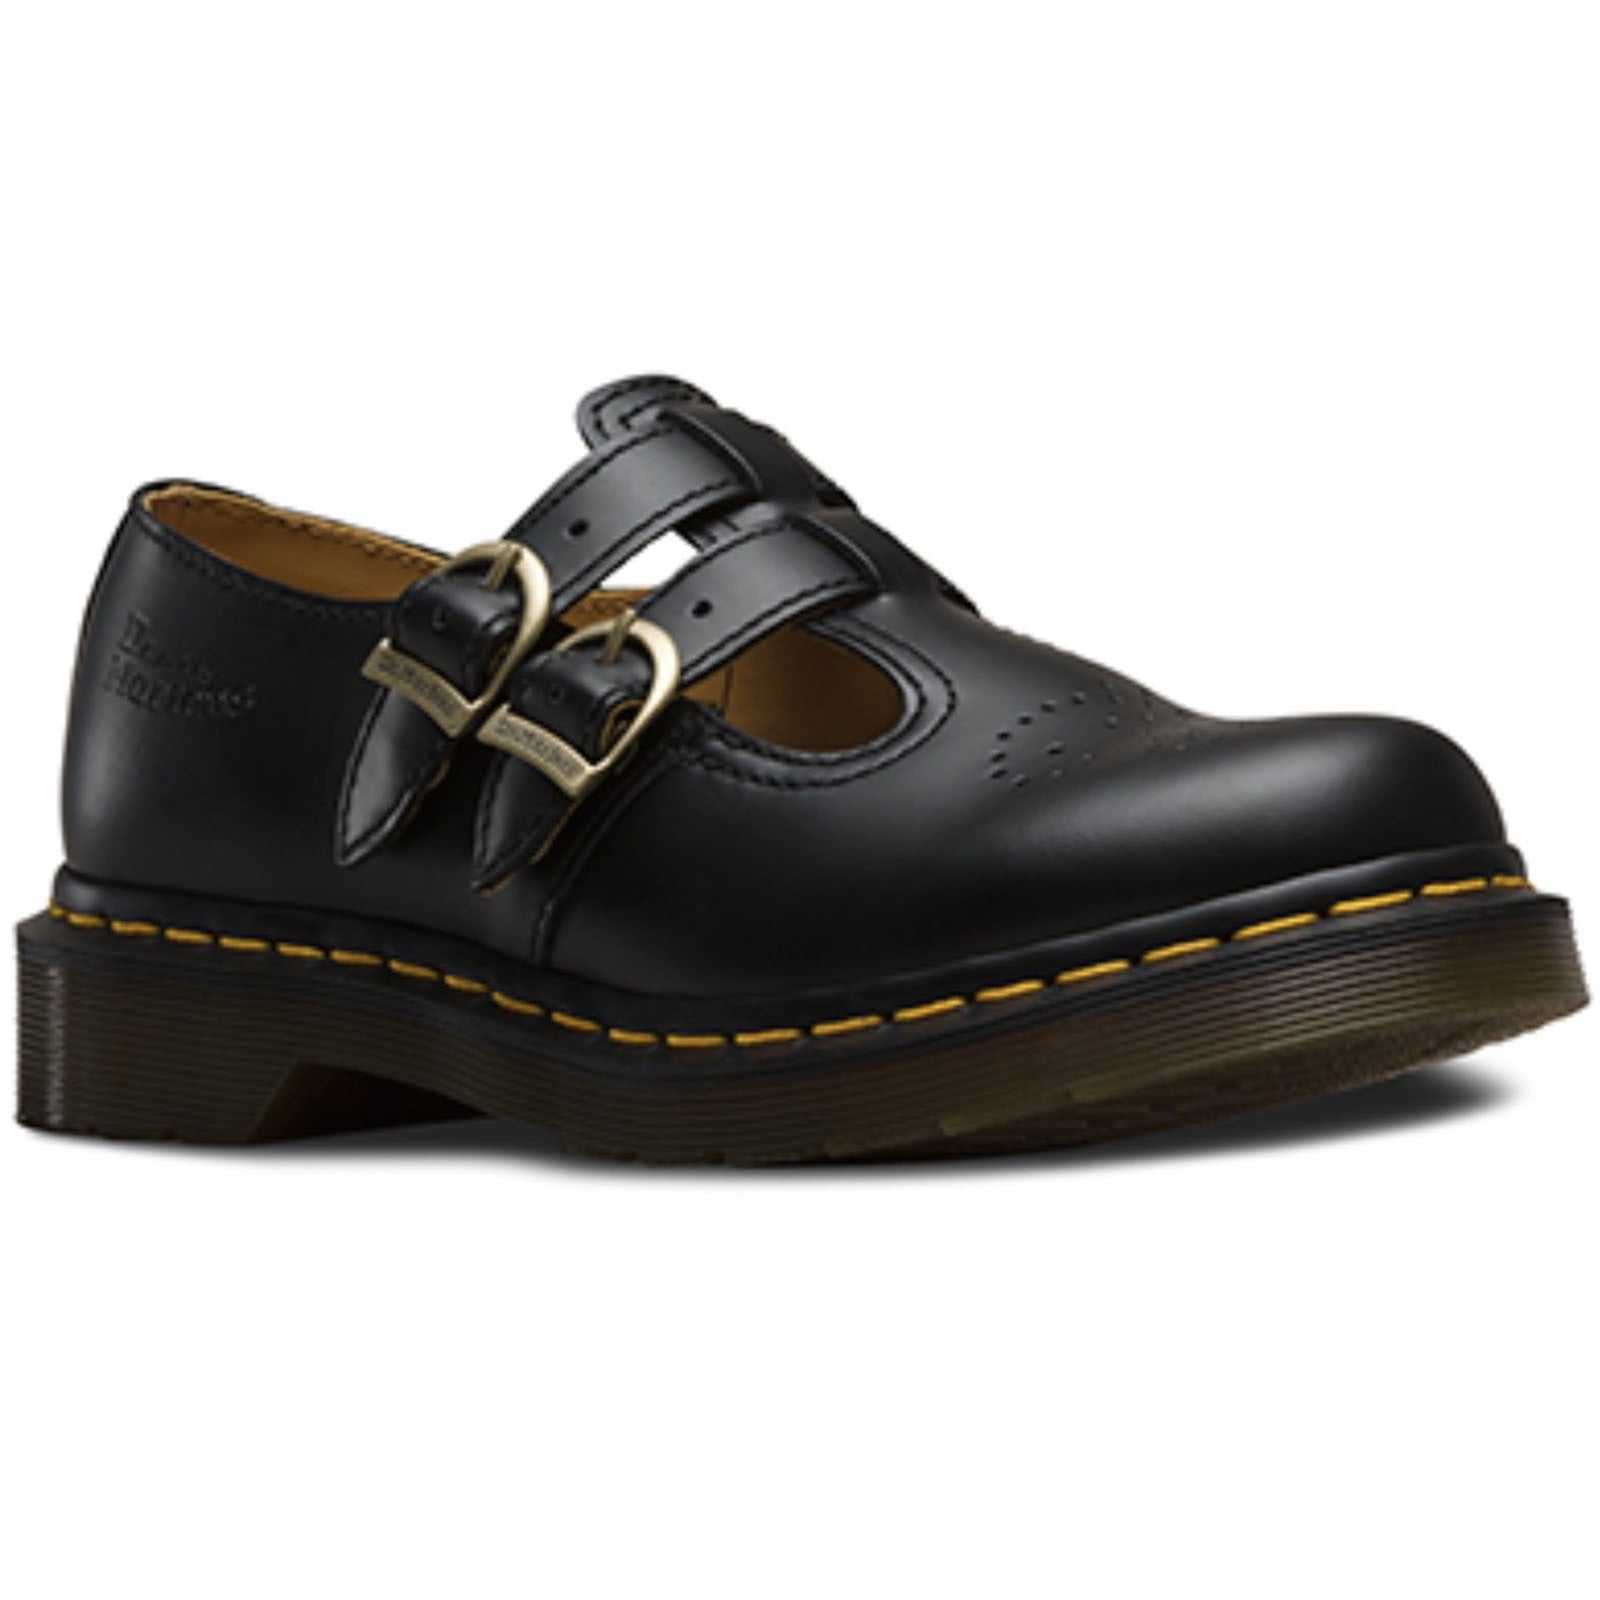 Dr. Martens 8065 Double Strap Mary Jane Shoes Flats Leather School Style Sandals